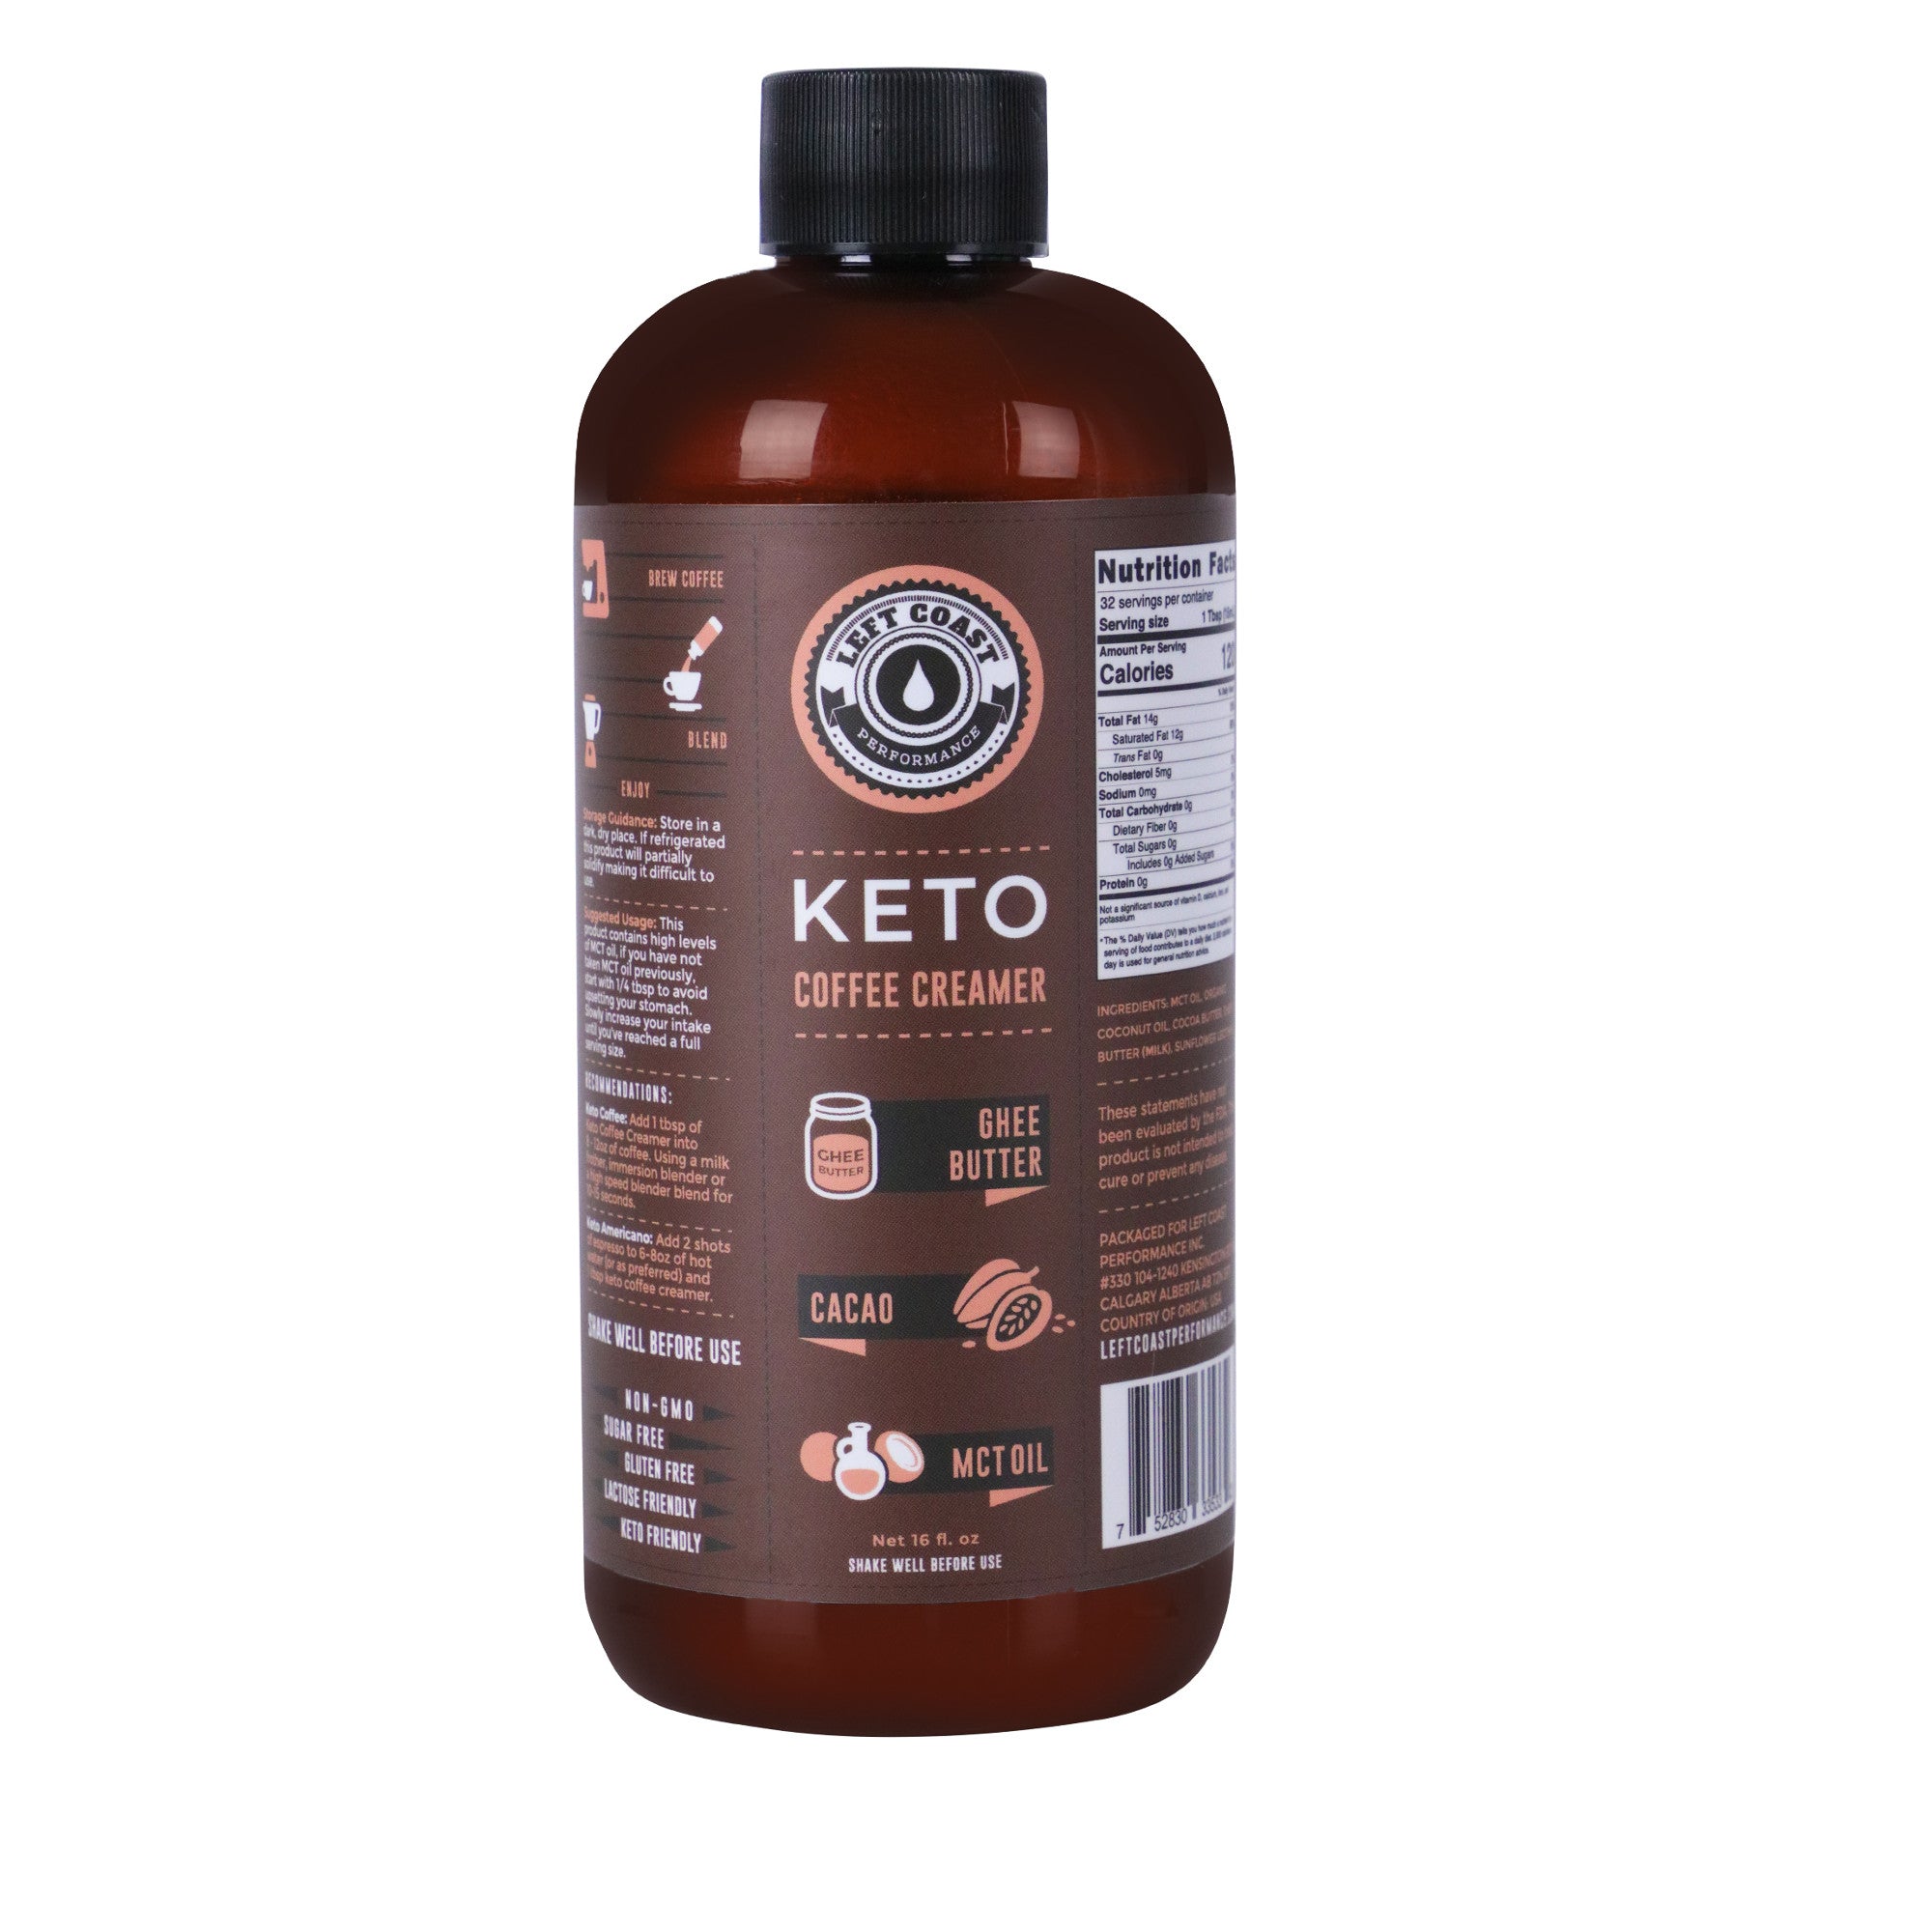 Keto Coffee Creamer with MCT Oil